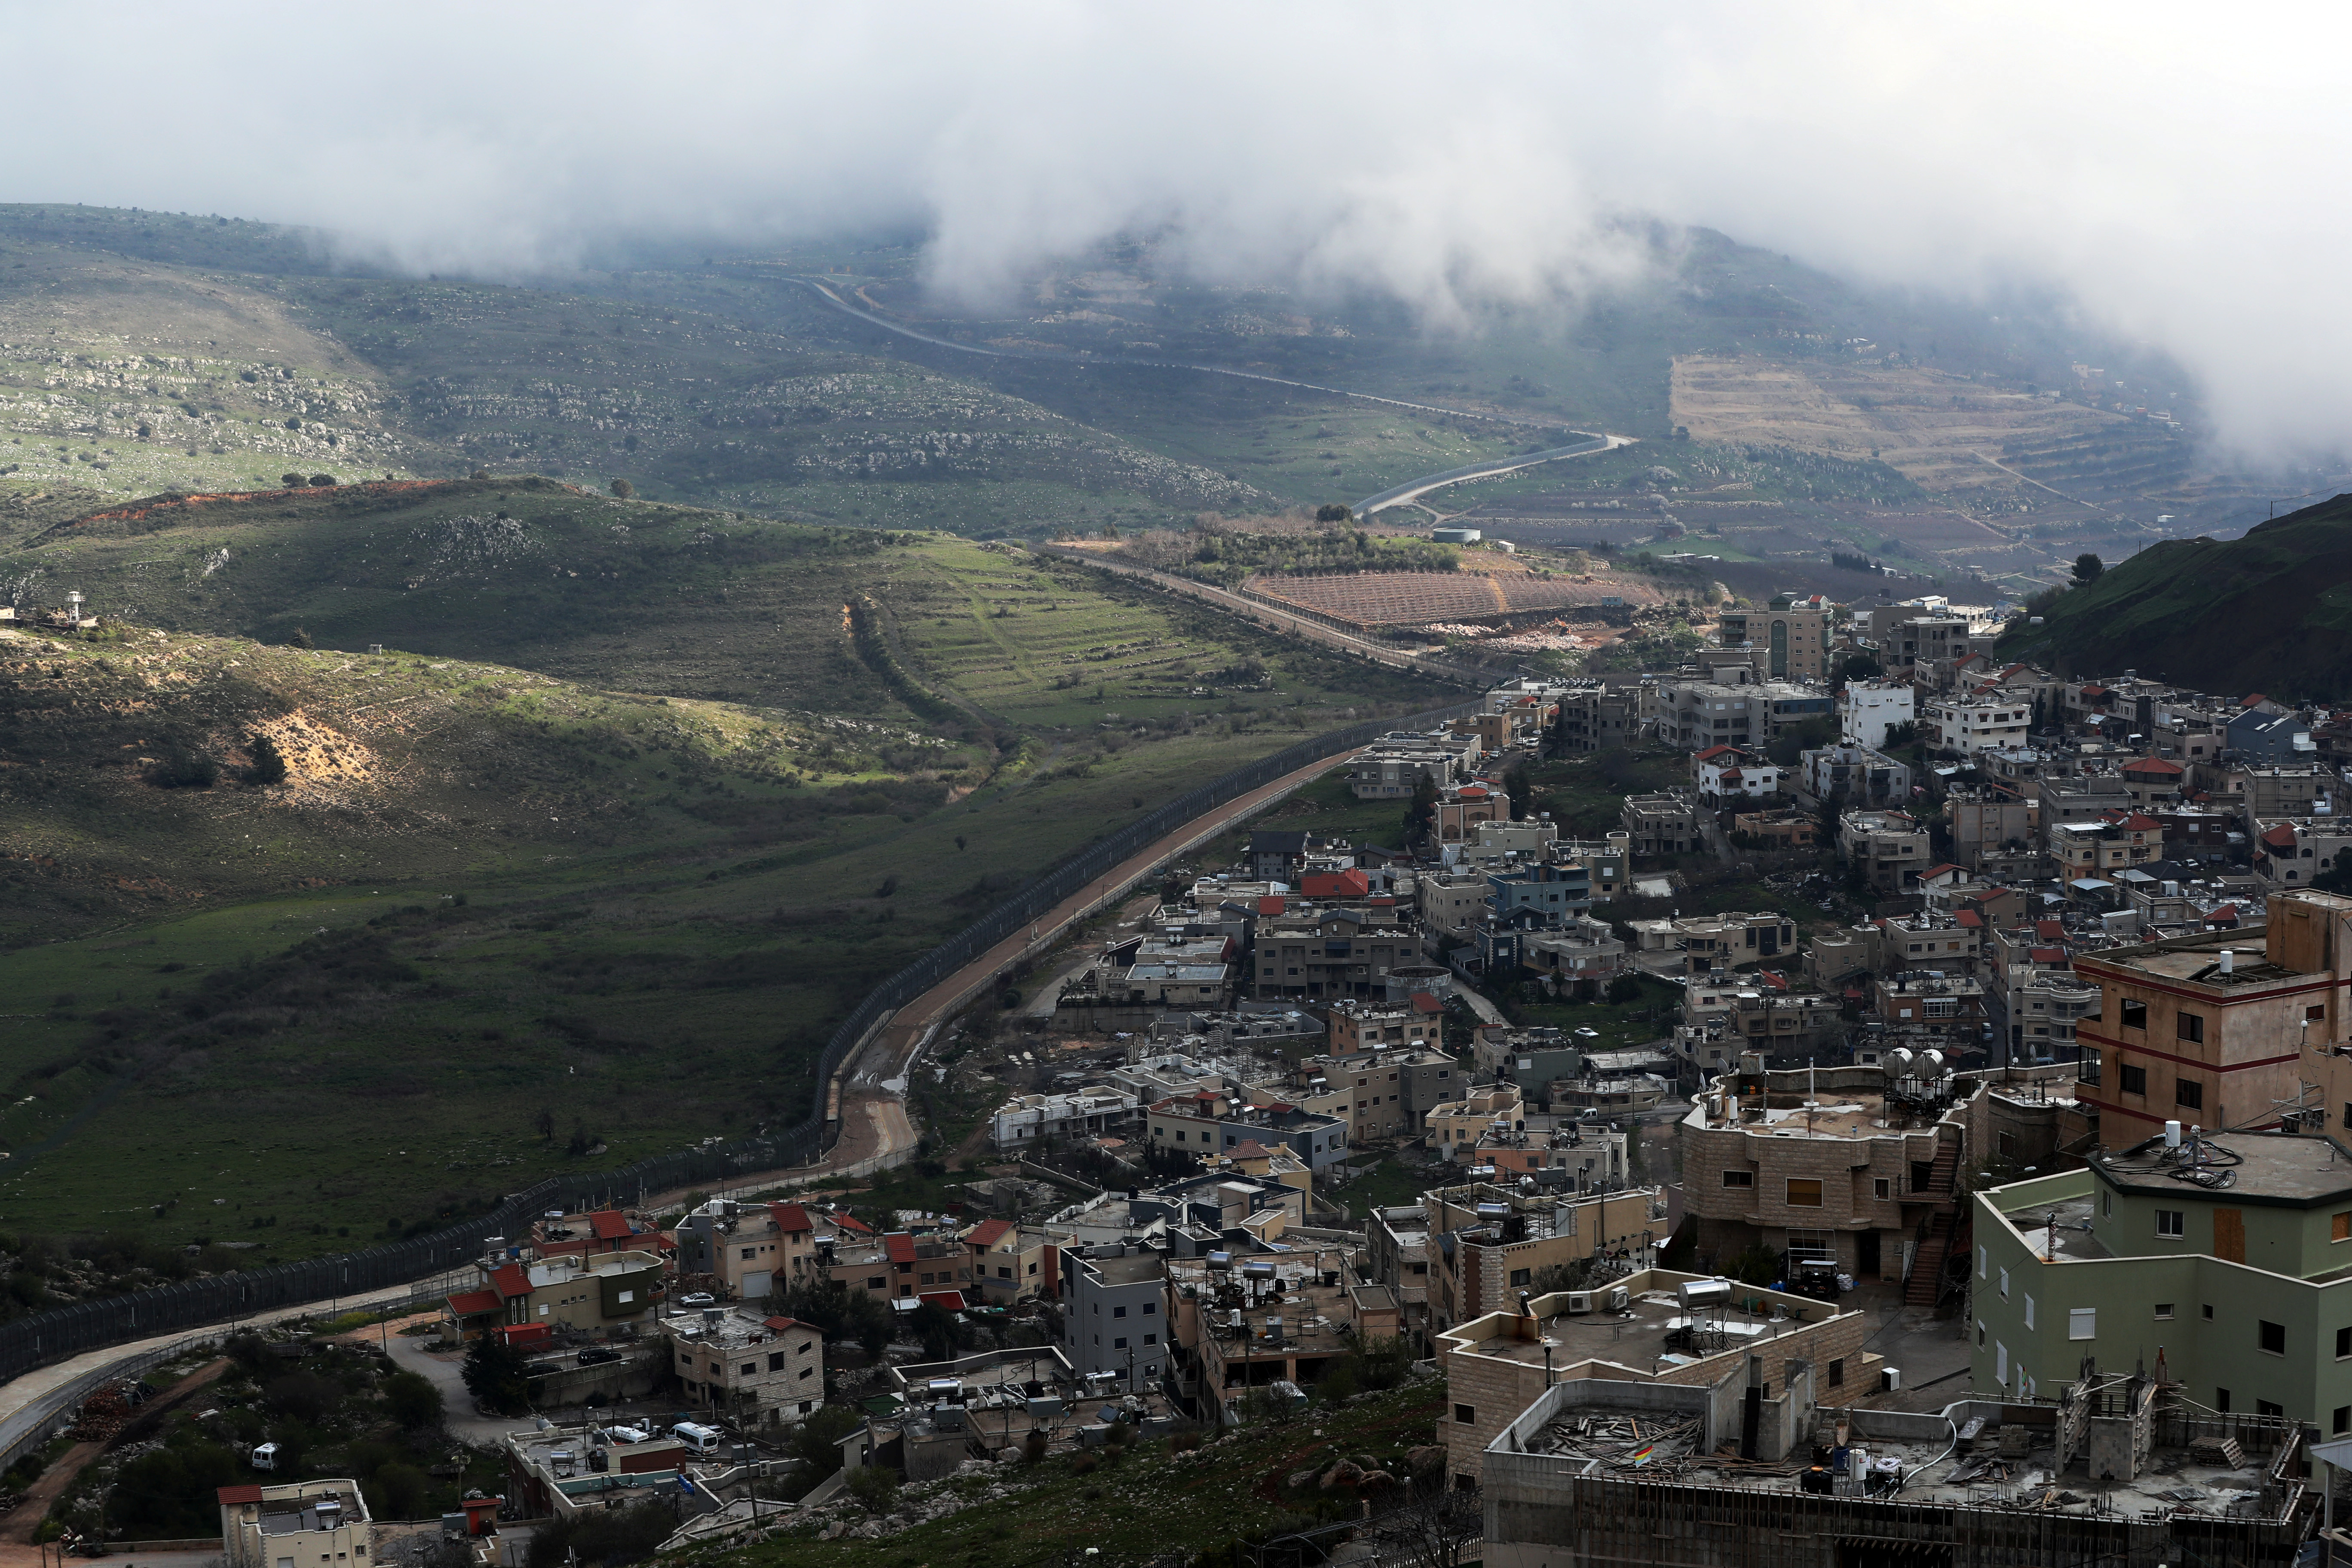 A general view shows the town of Majdal Shams near the ceasefire line between Israel and Syria in the Israeli-occupied Golan Heights